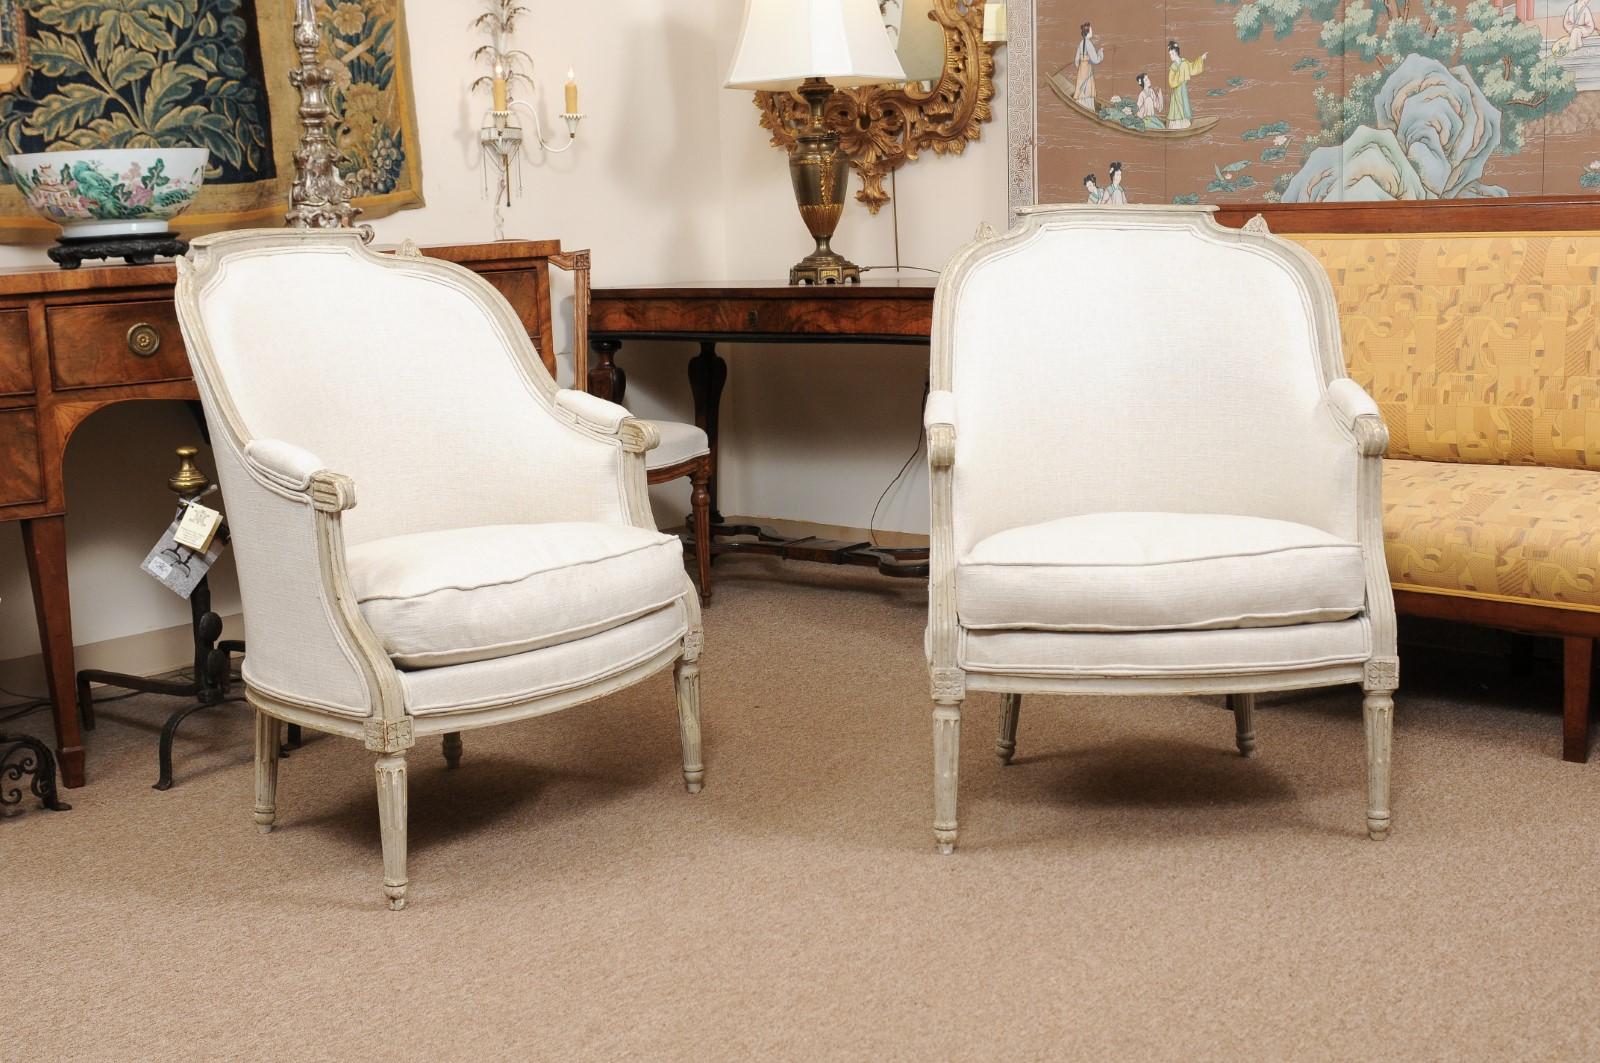 A pair of Late 18th century Louis XVI French painted Bergeres in a pale green hue with rounded backs, linen upholstery and carved fluted turned legs.